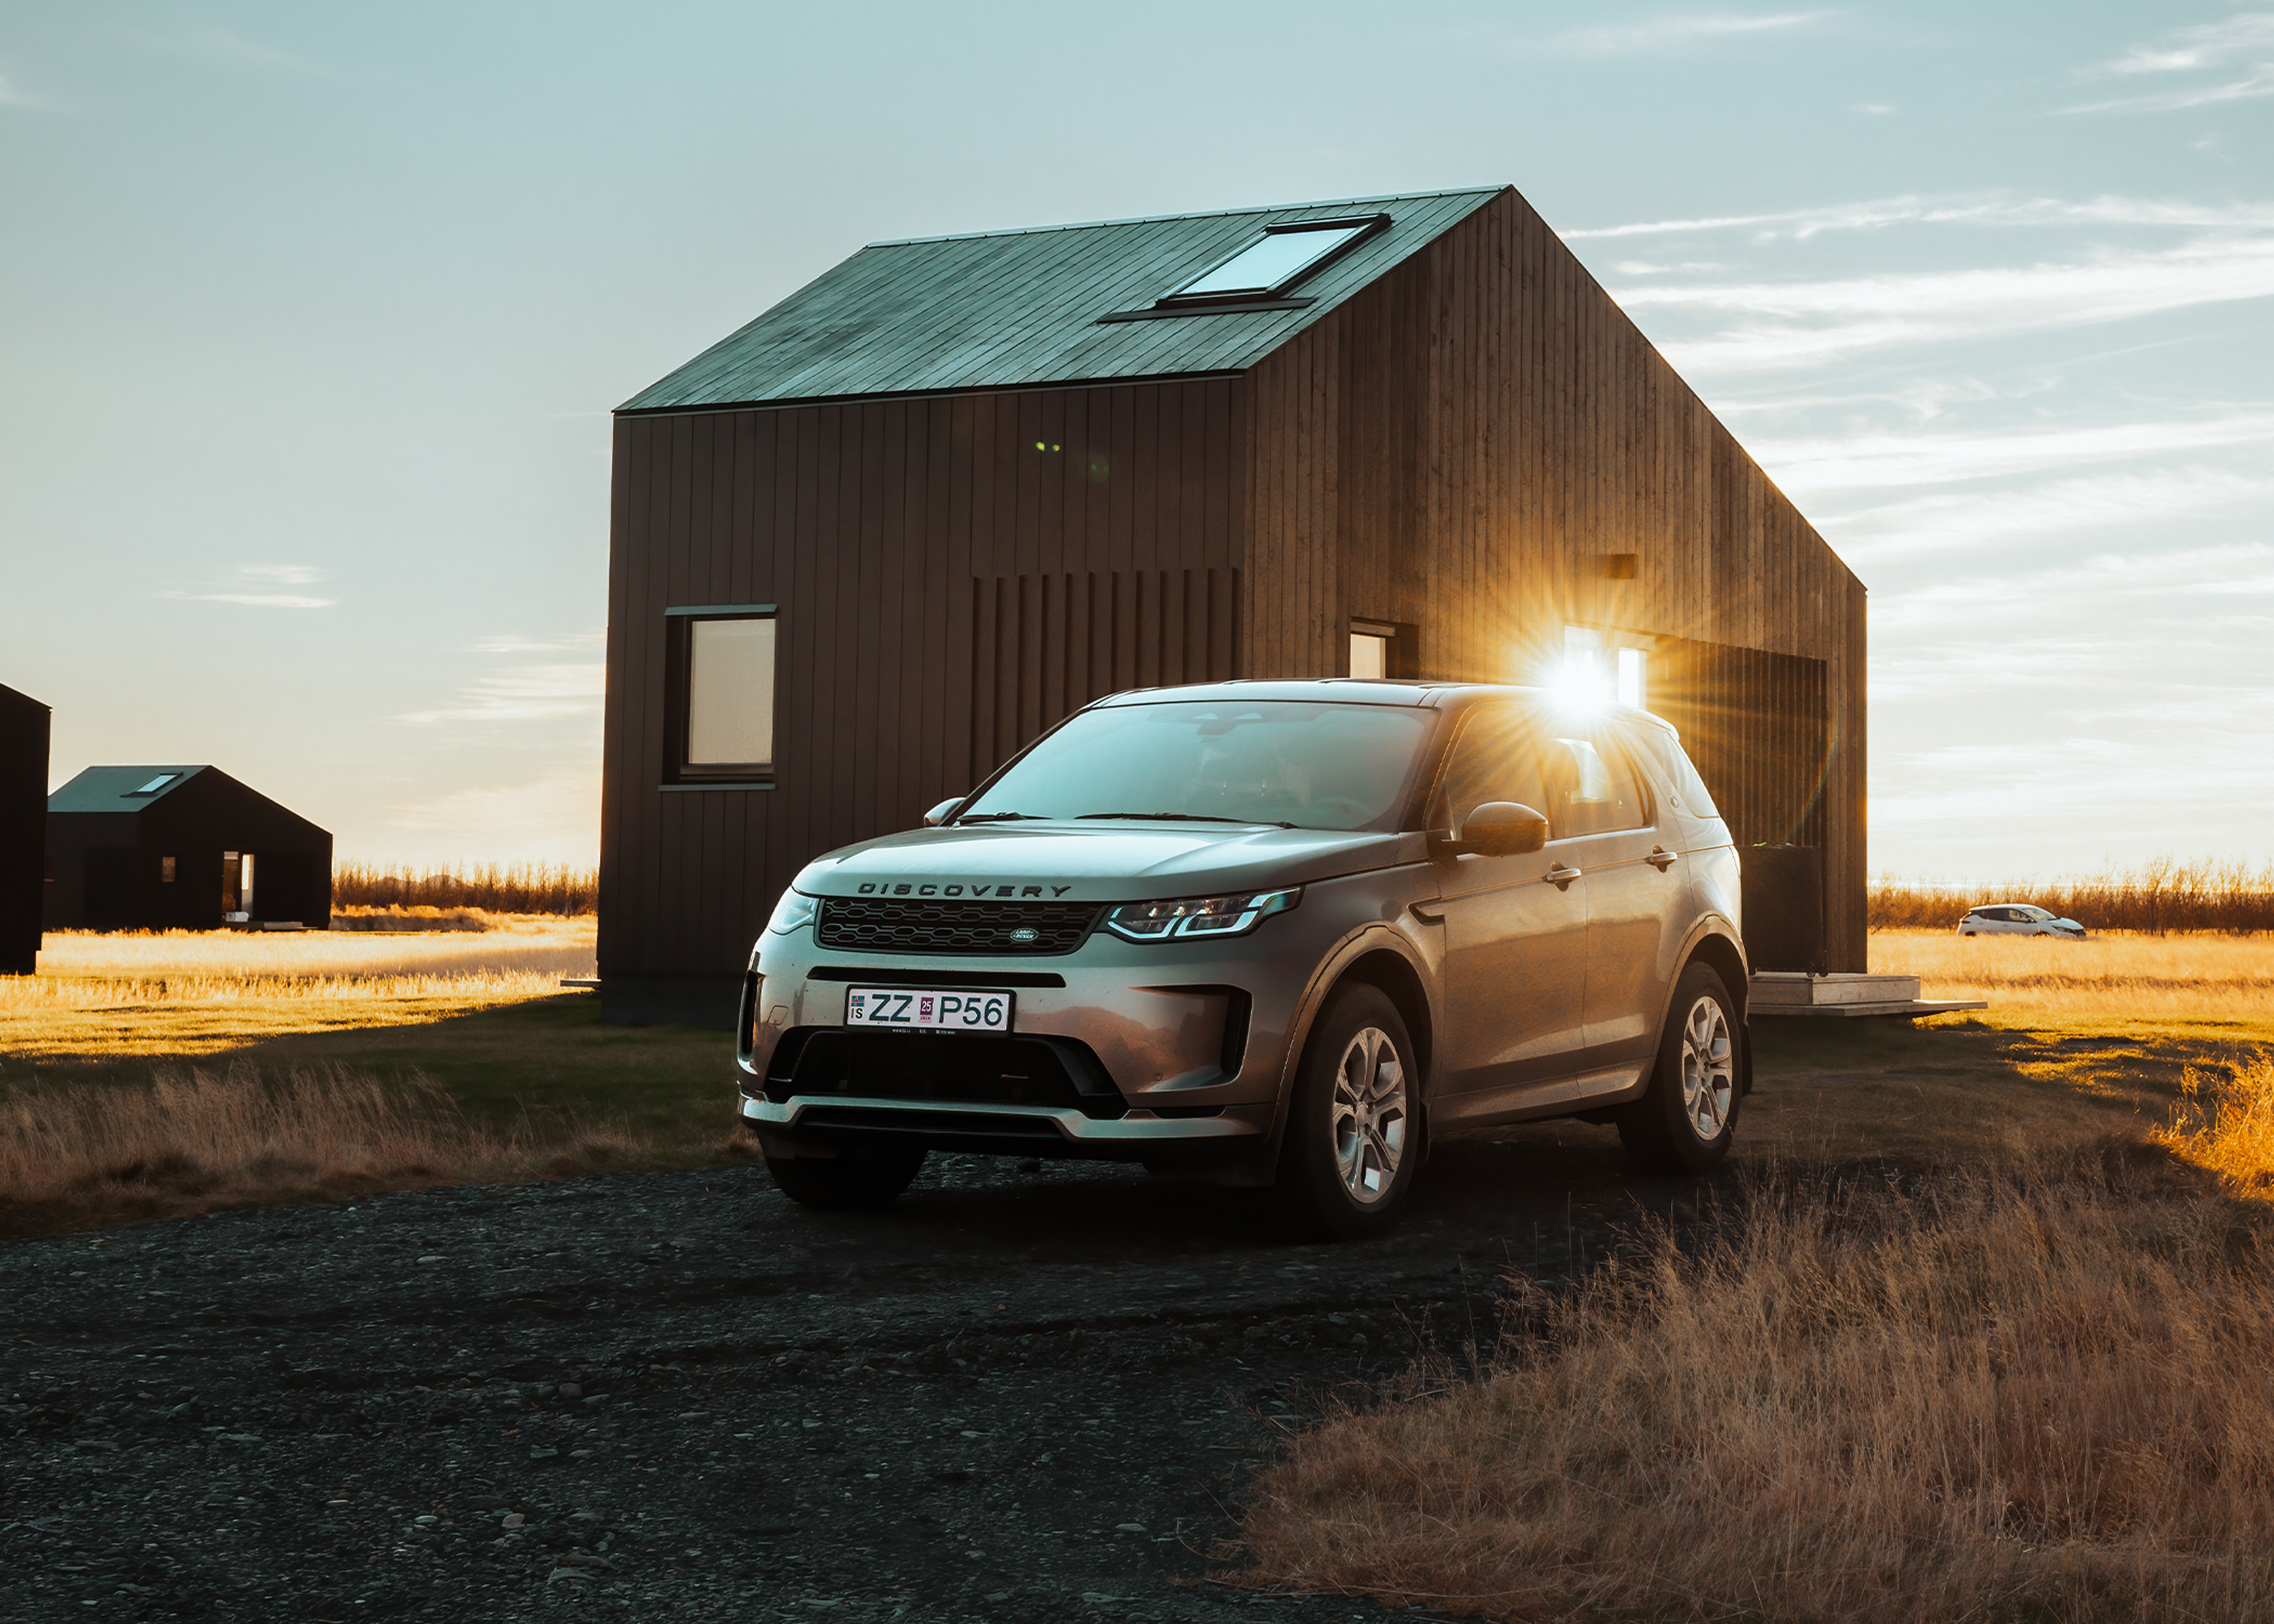 A Land Rover Discovery Sport rental car in Iceland, provided by Go Car Rental